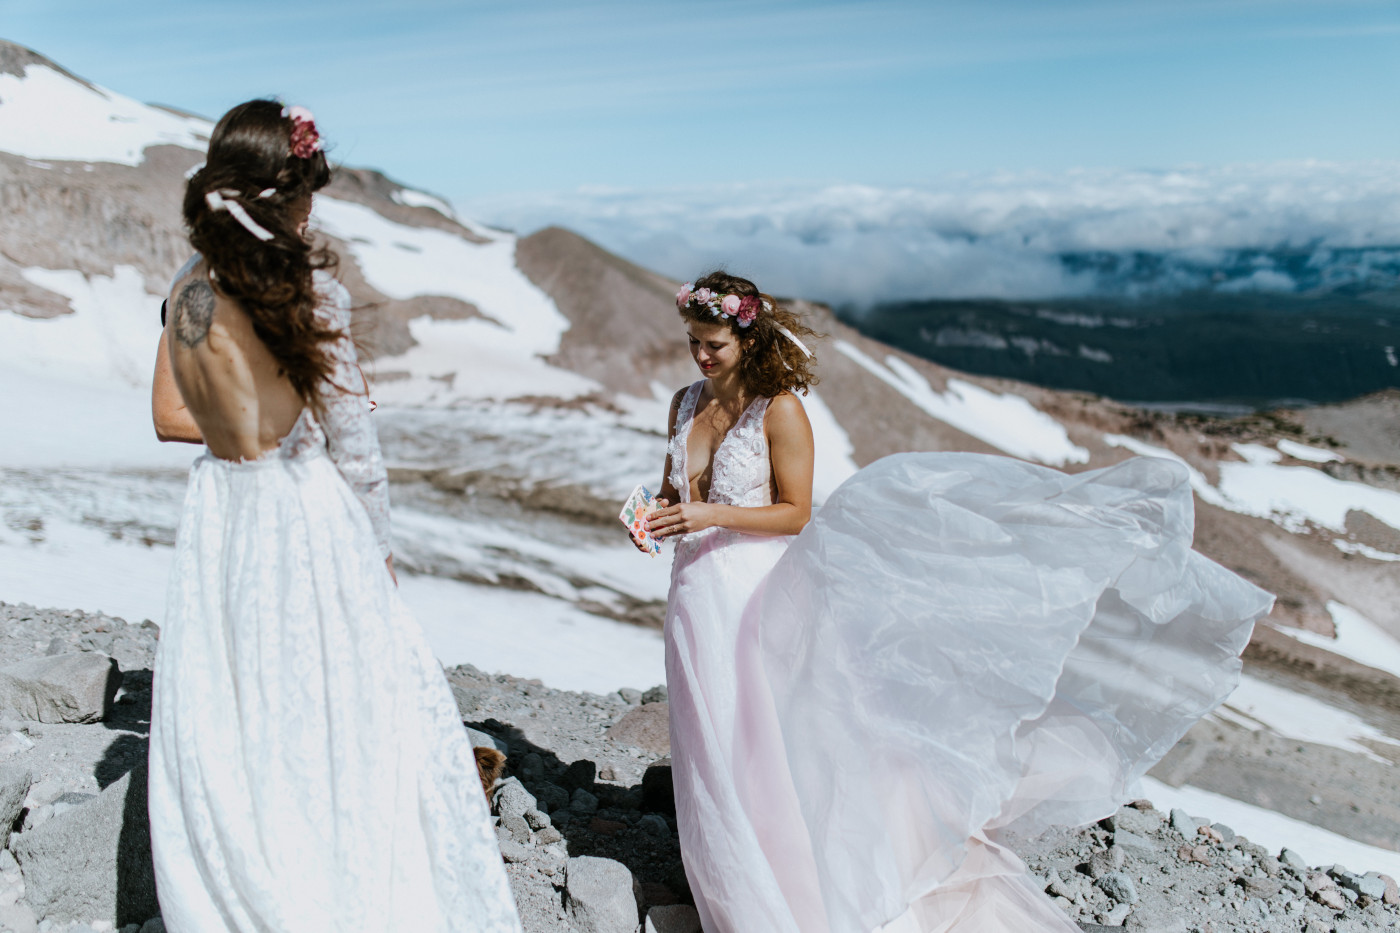 Heather reads her vows. Elopement photography at Mount Hood by Sienna Plus Josh.